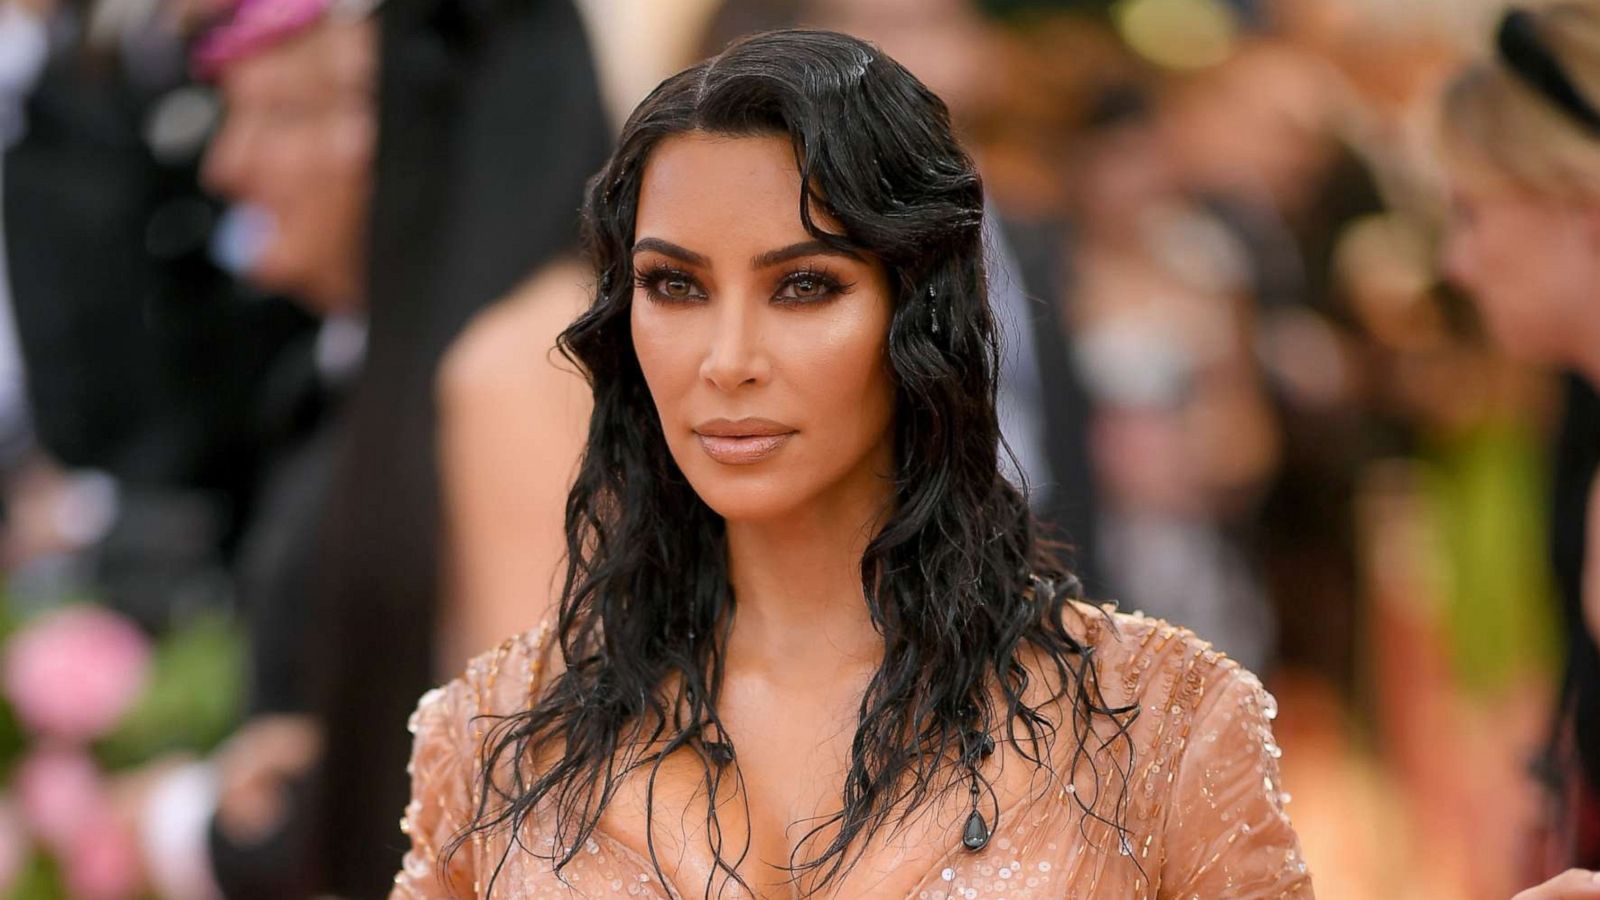 PHOTO: Kim Kardashian West attends the 2019 Met Gala's "Celebrating Camp: Notes on Fashion" event at Metropolitan Museum of Art on May 06, 2019, in New York.